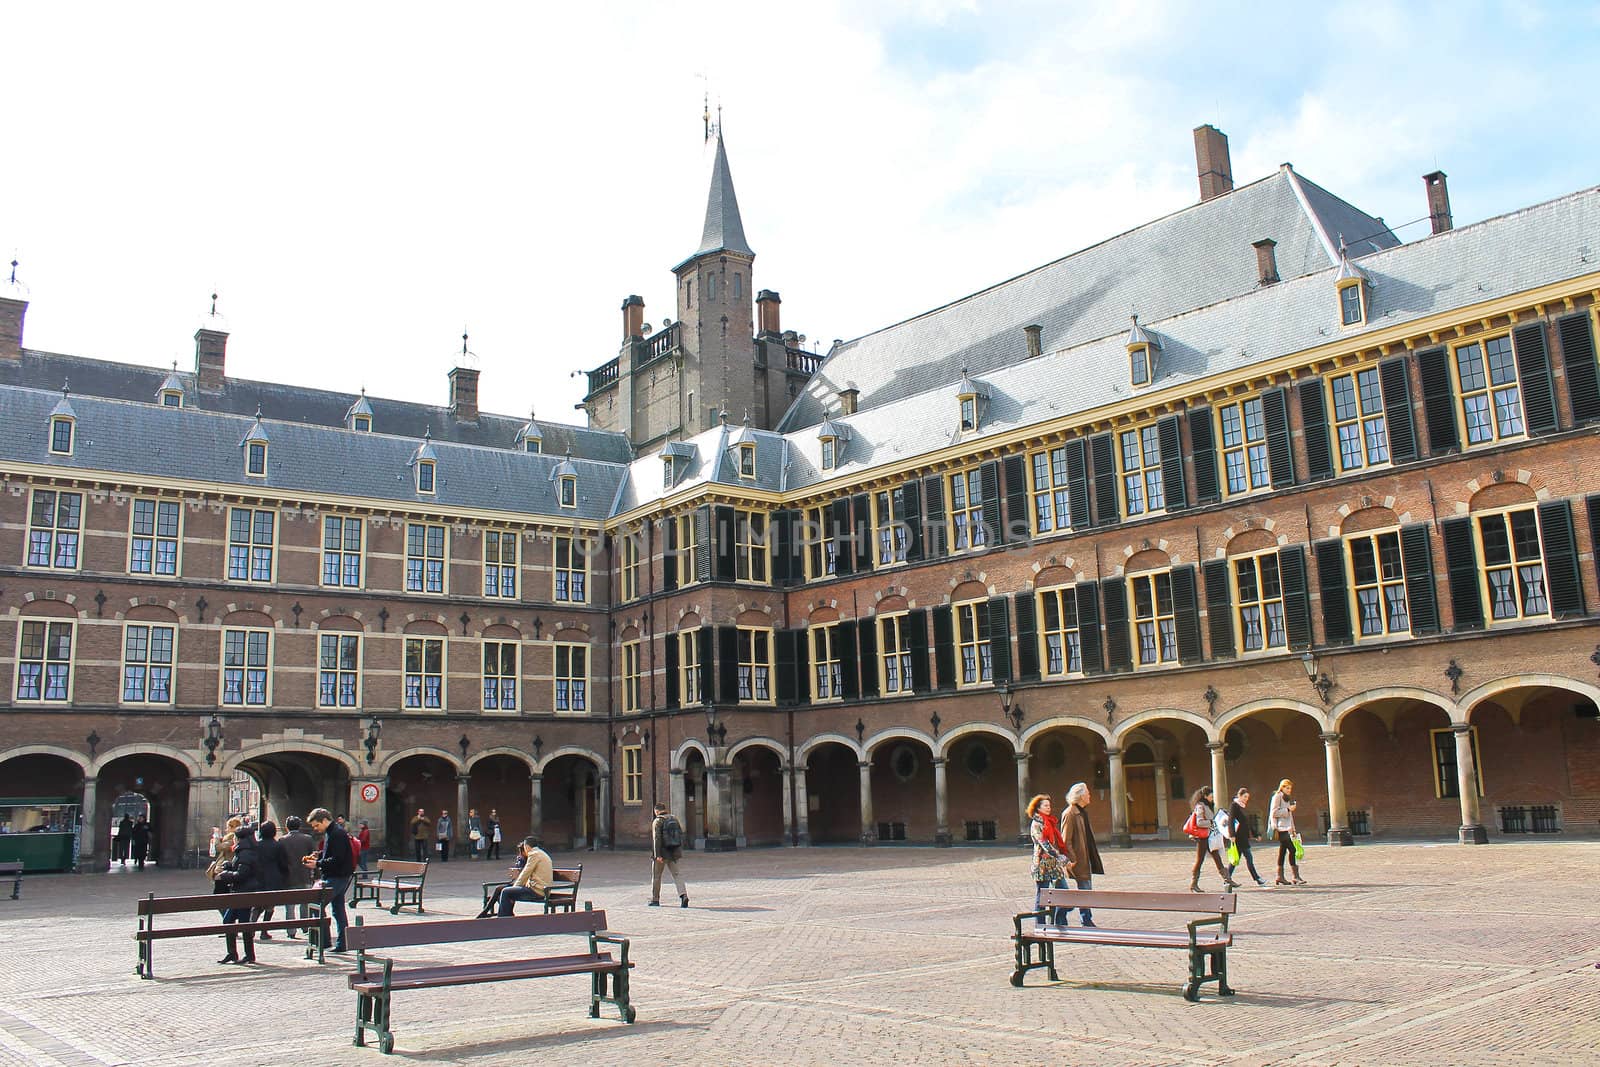 The Binnenhof at Den Haag, building of the dutch parliament and government 